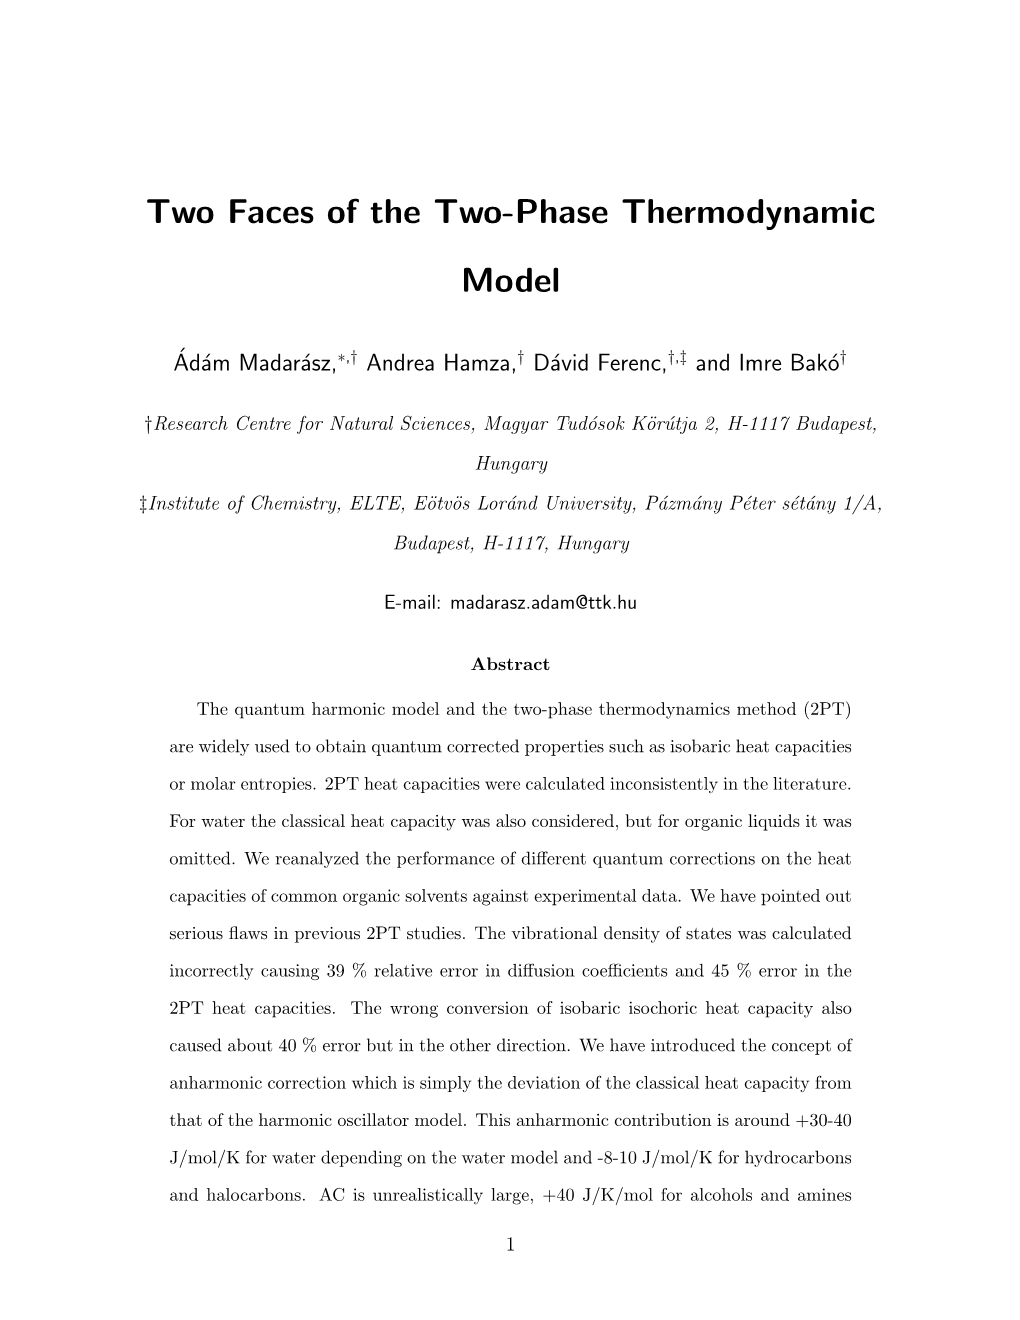 Two Faces of the Two-Phase Thermodynamic Model